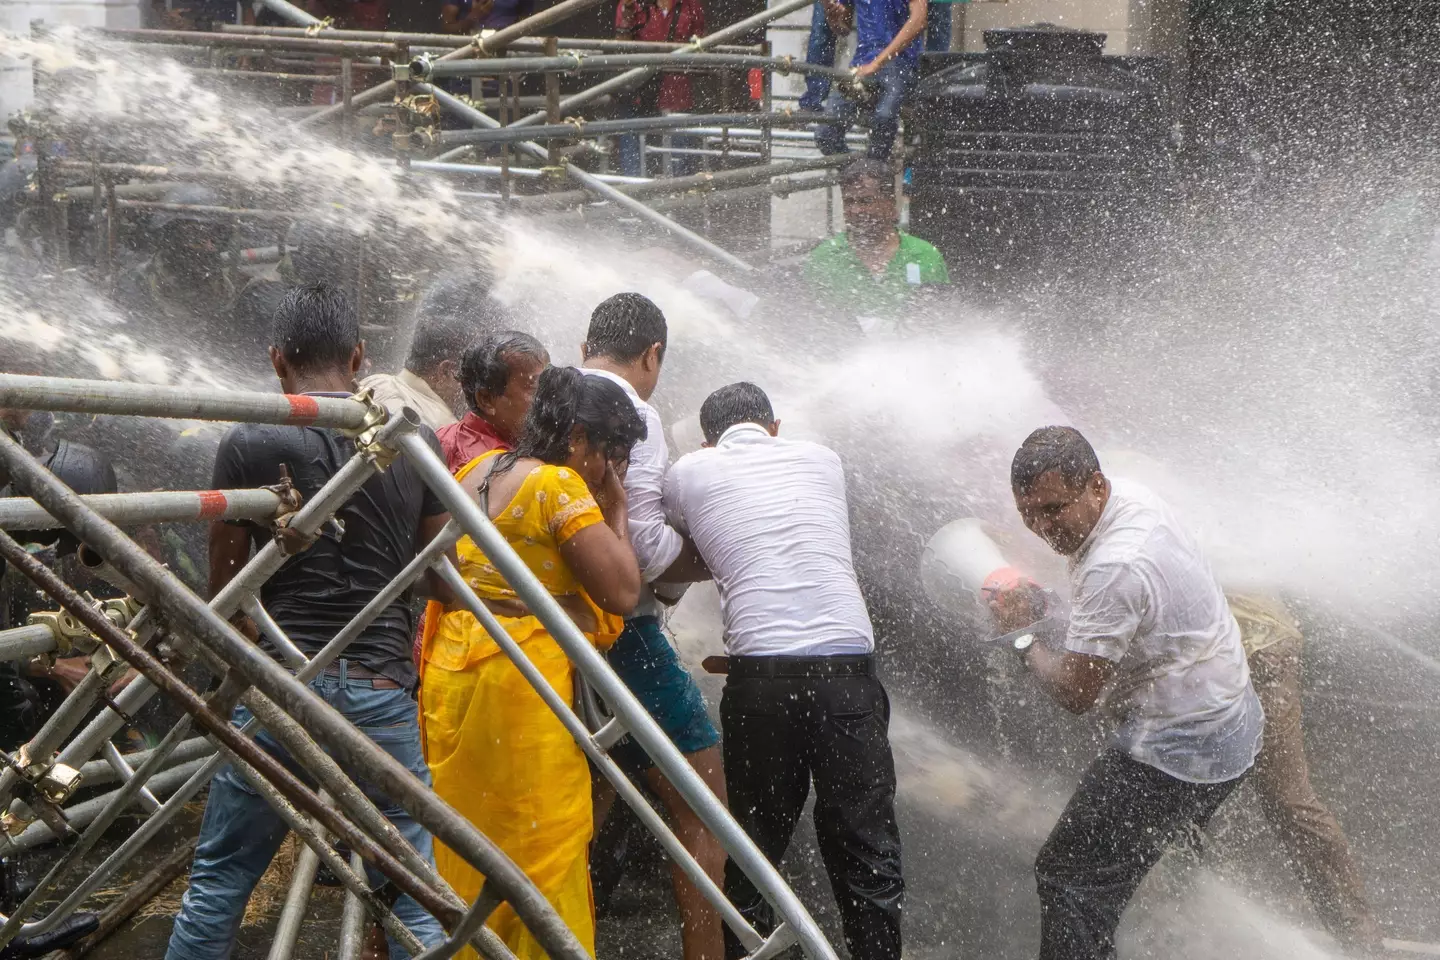 Sri Lankan protesters were repelled from the area around the presidential house with water cannons on July 6.